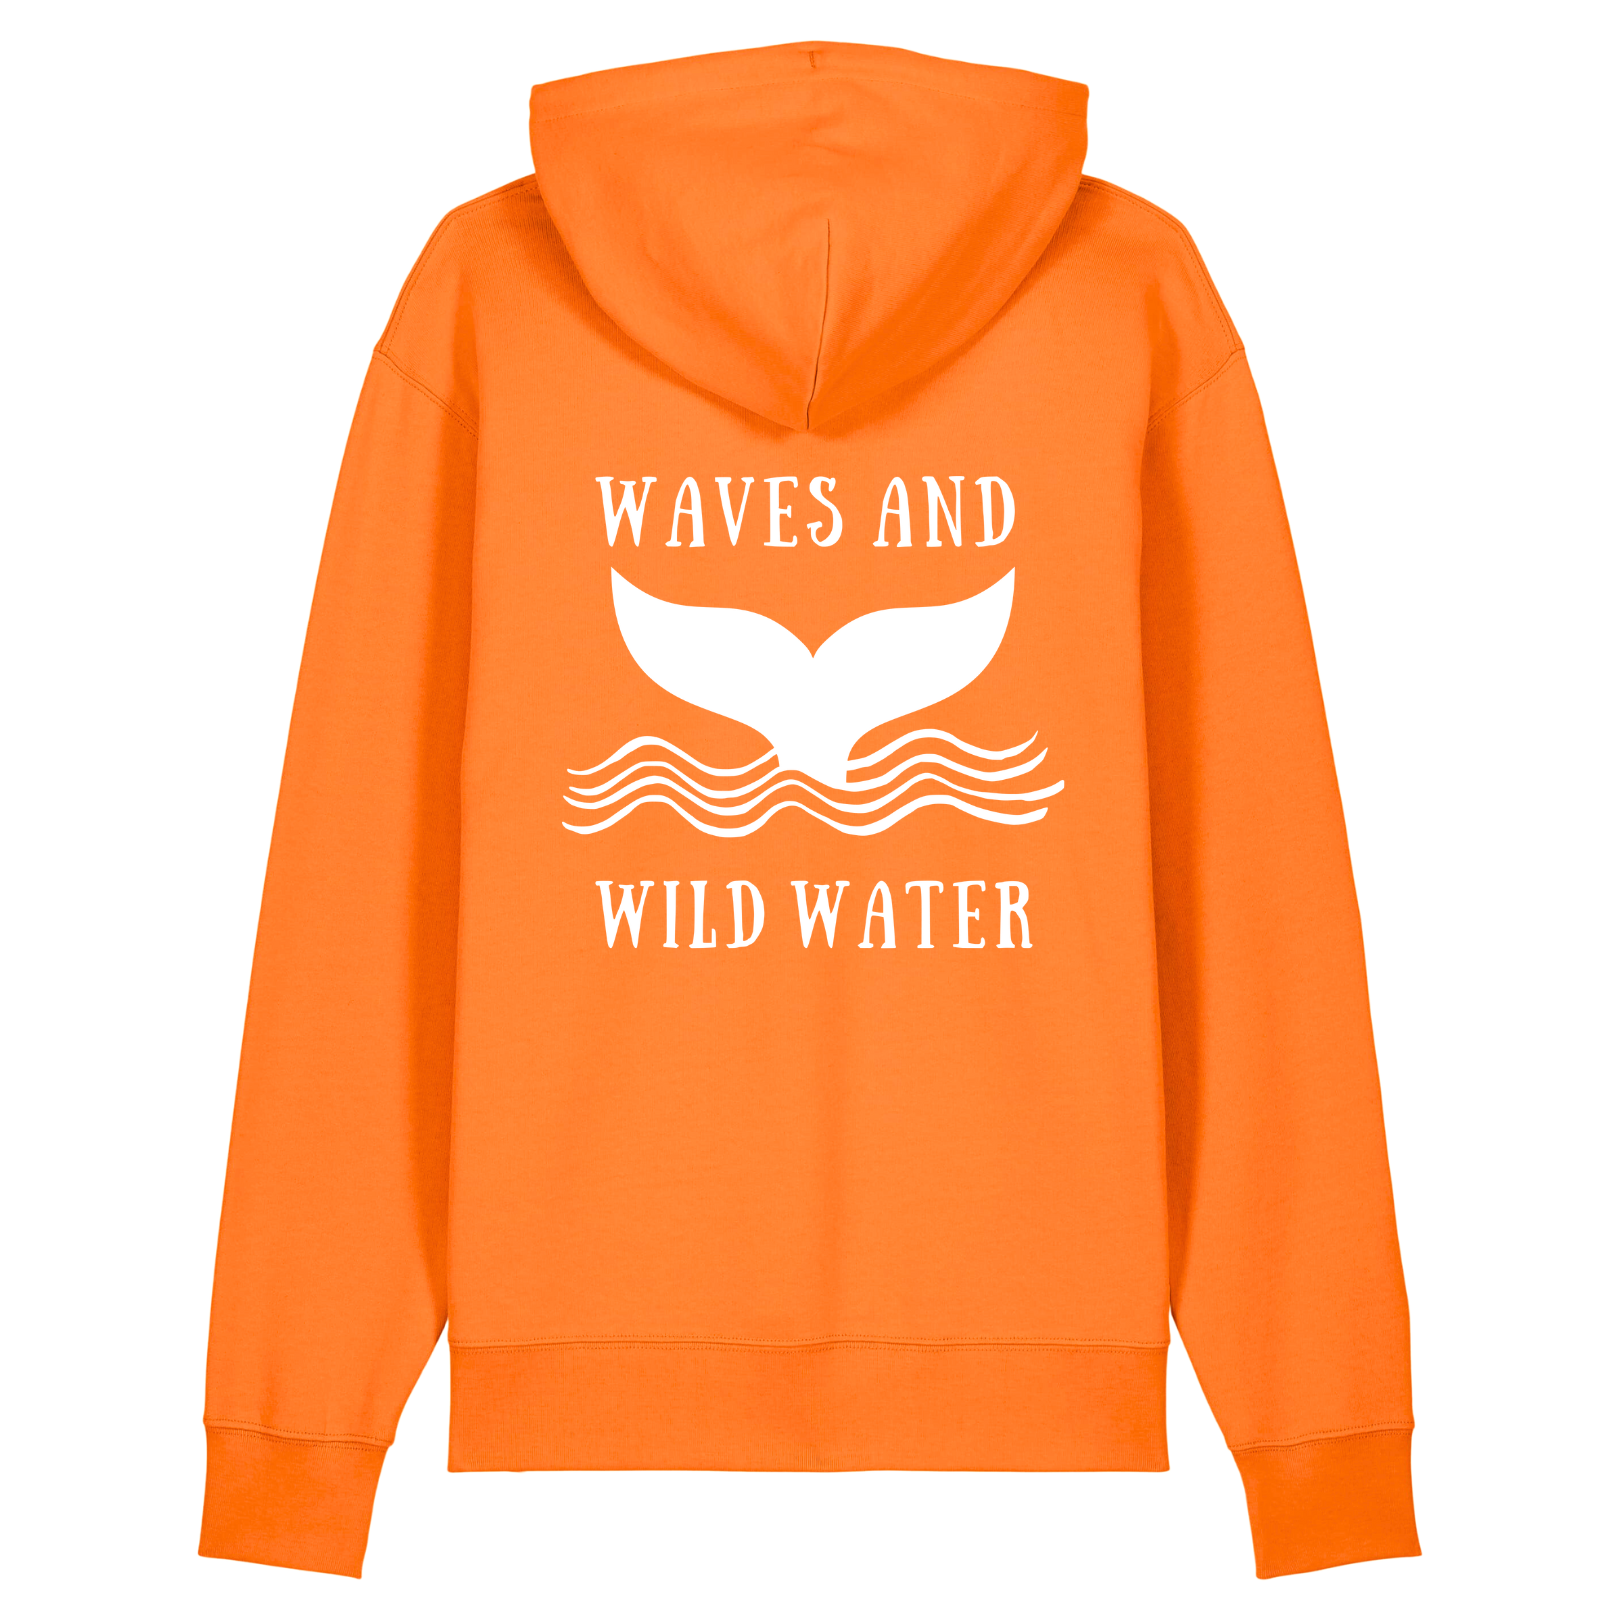 The back of our Beach Hut Hoodie in bright orange with a large Waves and Wild Water logo hand printed in white vegan ink across the back. The logo depicts a majestic whale tail emerging from the waves and we like to pop ours on to cosy up after an invigorating dip in the sea.